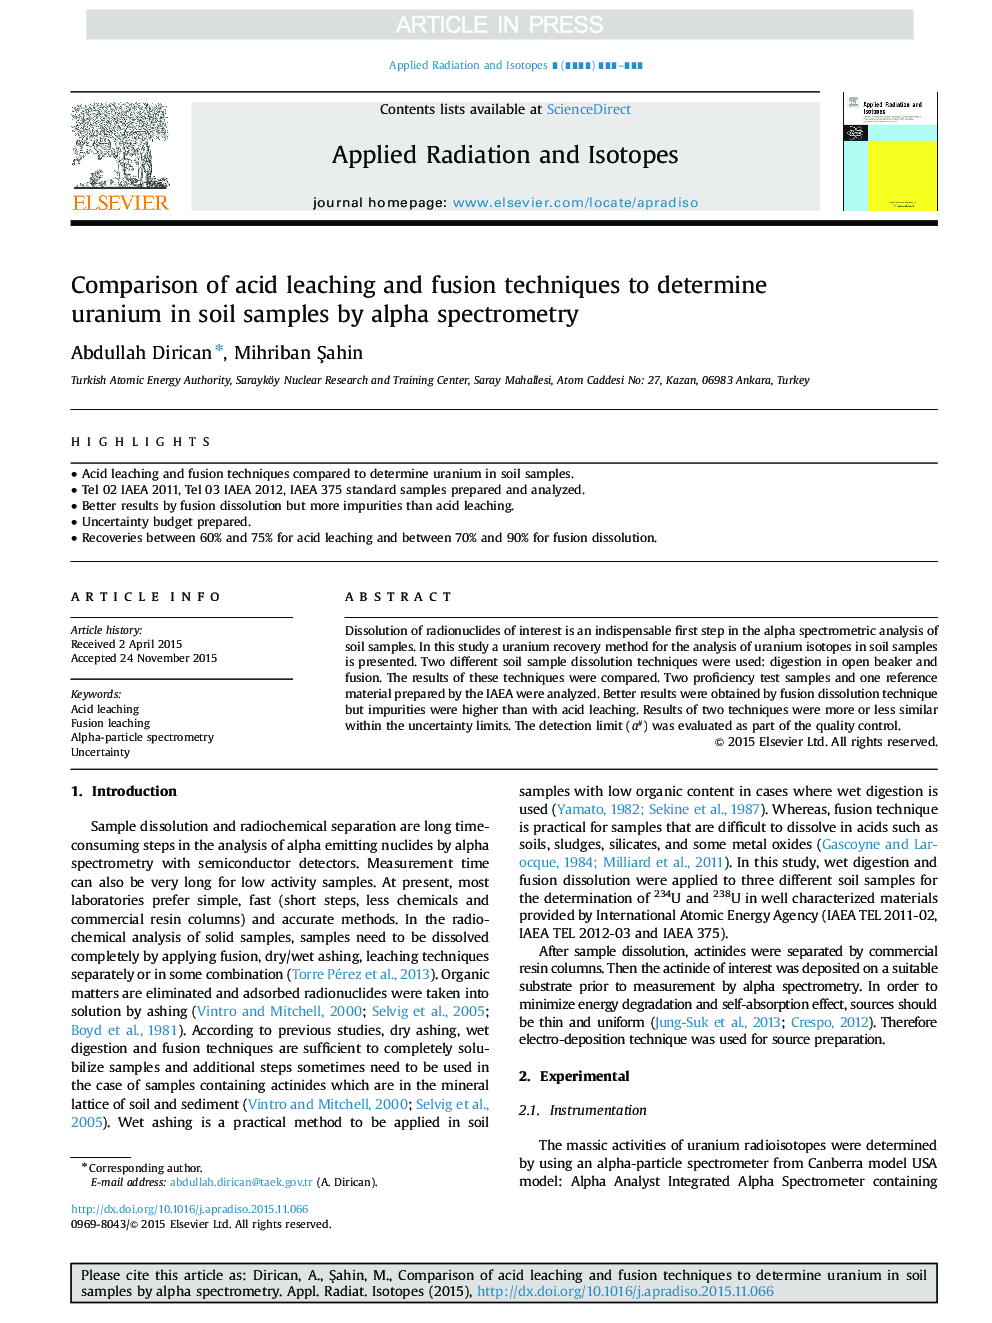 Comparison of acid leaching and fusion techniques to determine uranium in soil samples by alpha spectrometry